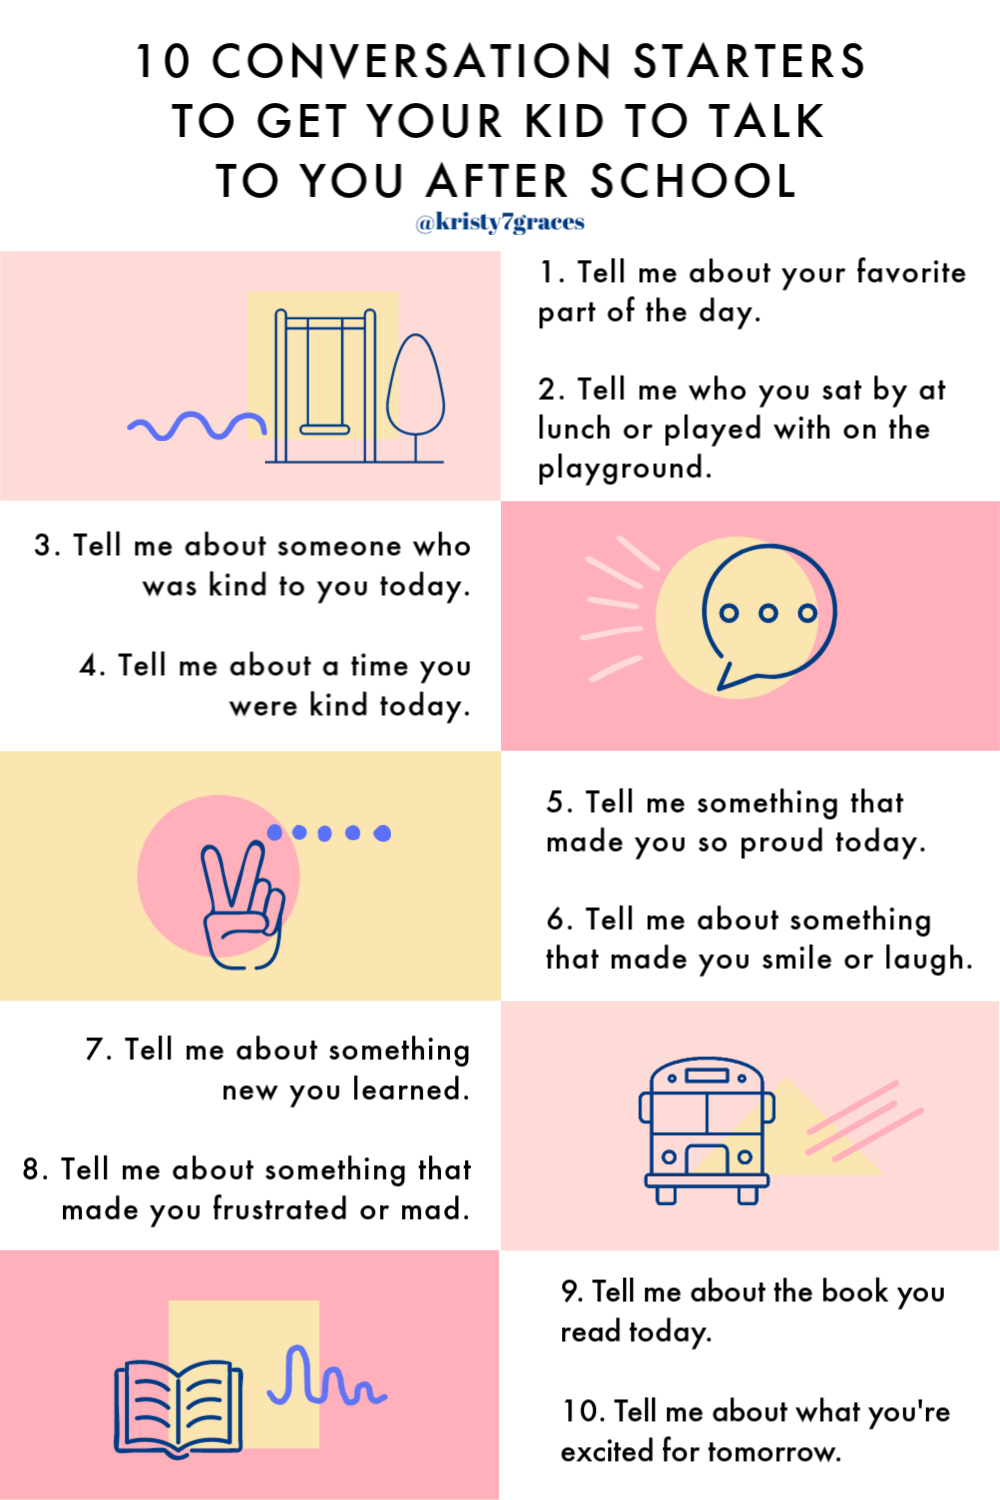 10 of the best conversation starters to get your child to open up to you after school and a fun new popsicle treat to enjoy while chatting.